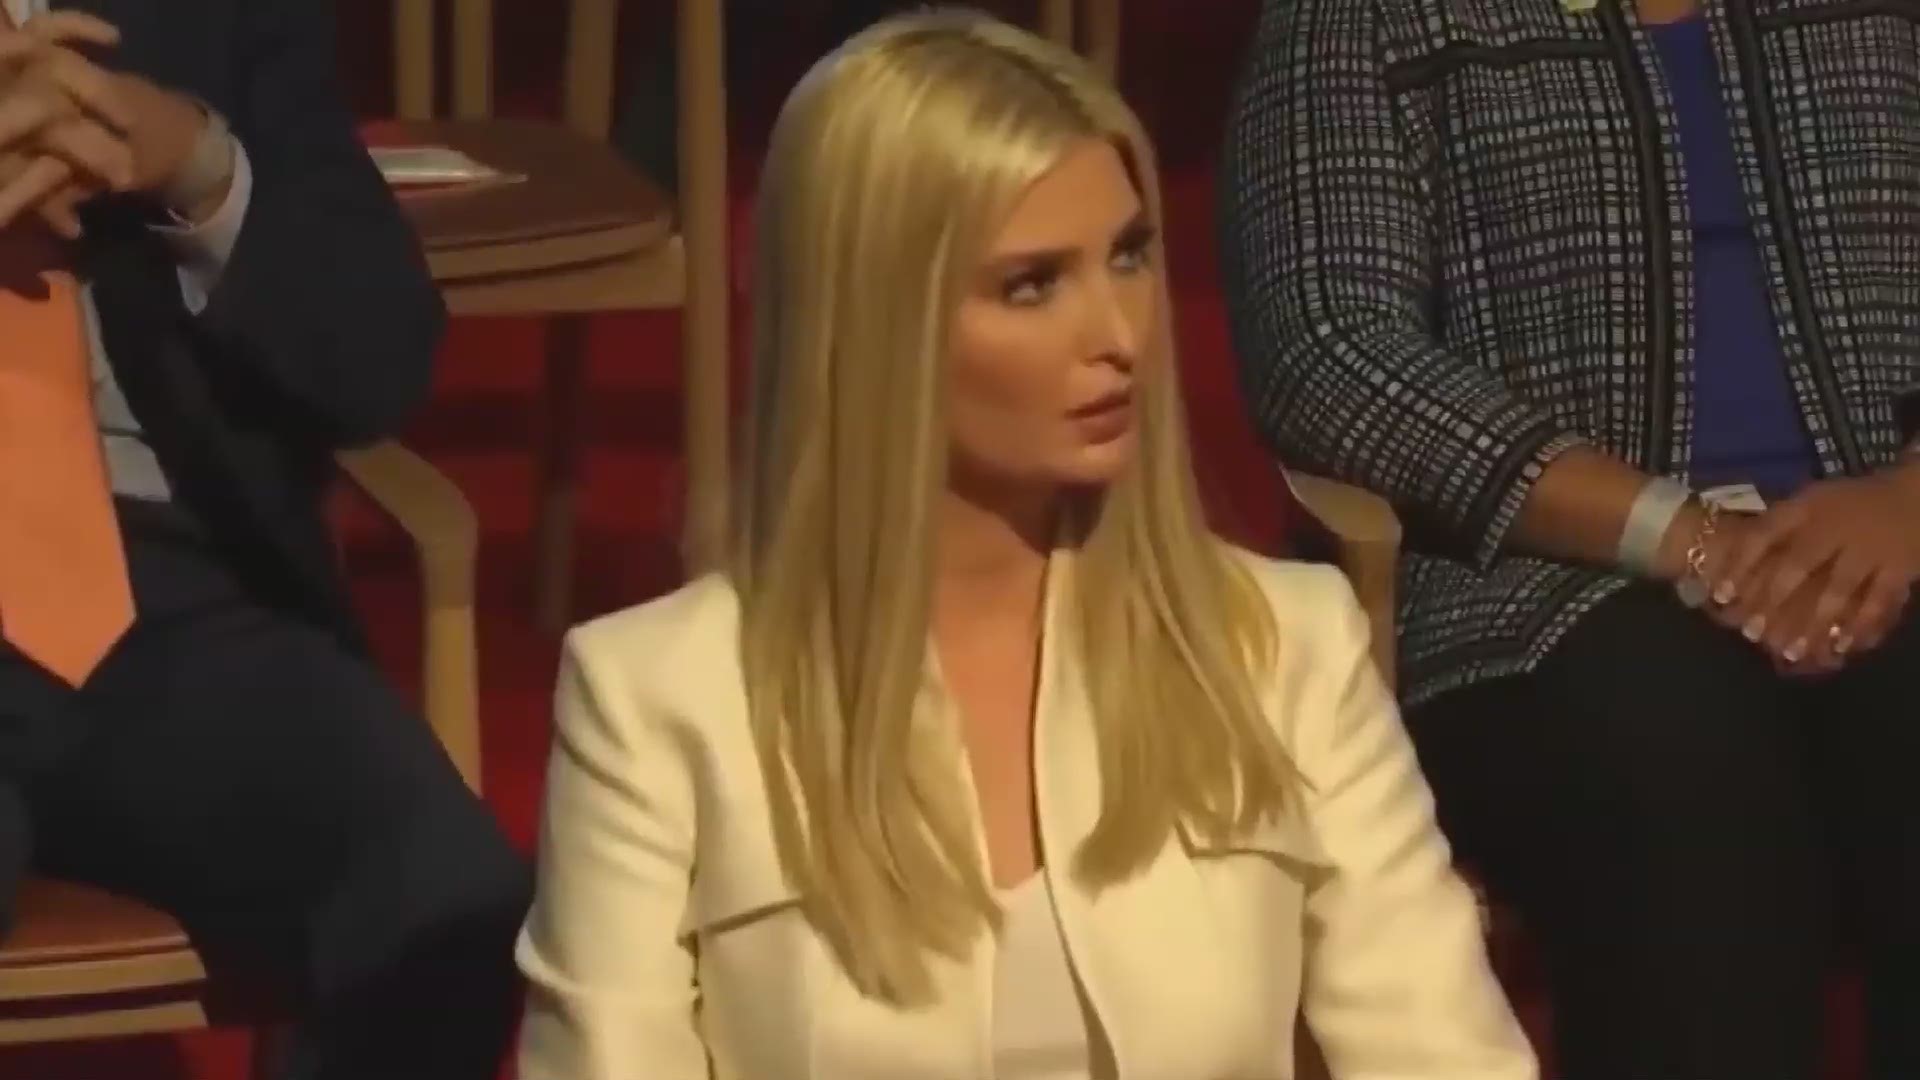 First Lady Melania Trump, and President Trump's children were all seen not wearing masks in the Cleveland debate venue on Tuesday.